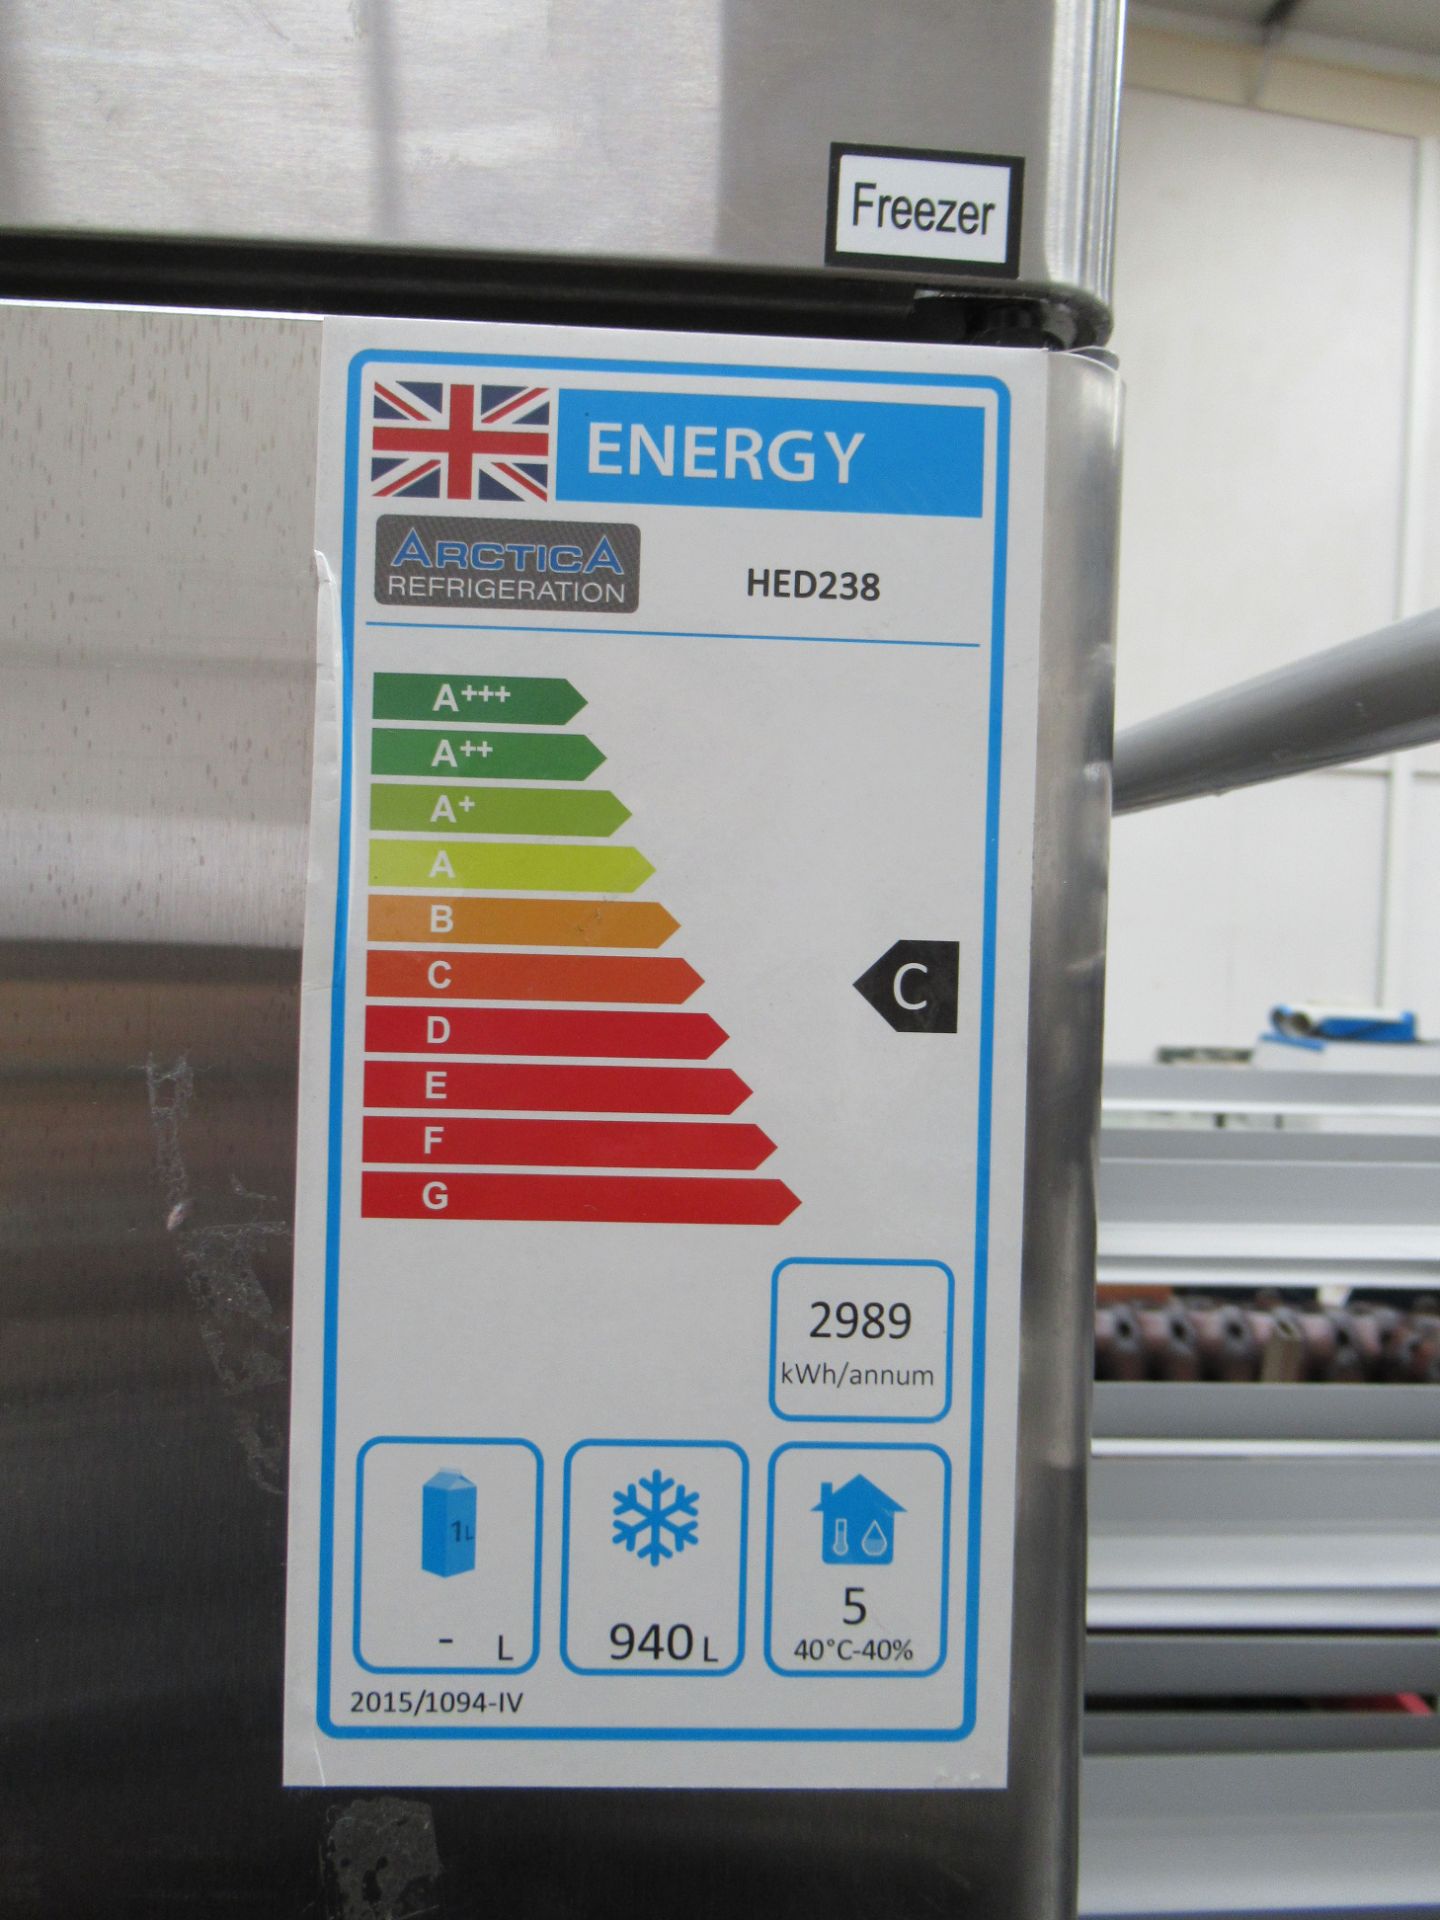 An Arctica Refrigeration stainless steel freezer - Image 4 of 4